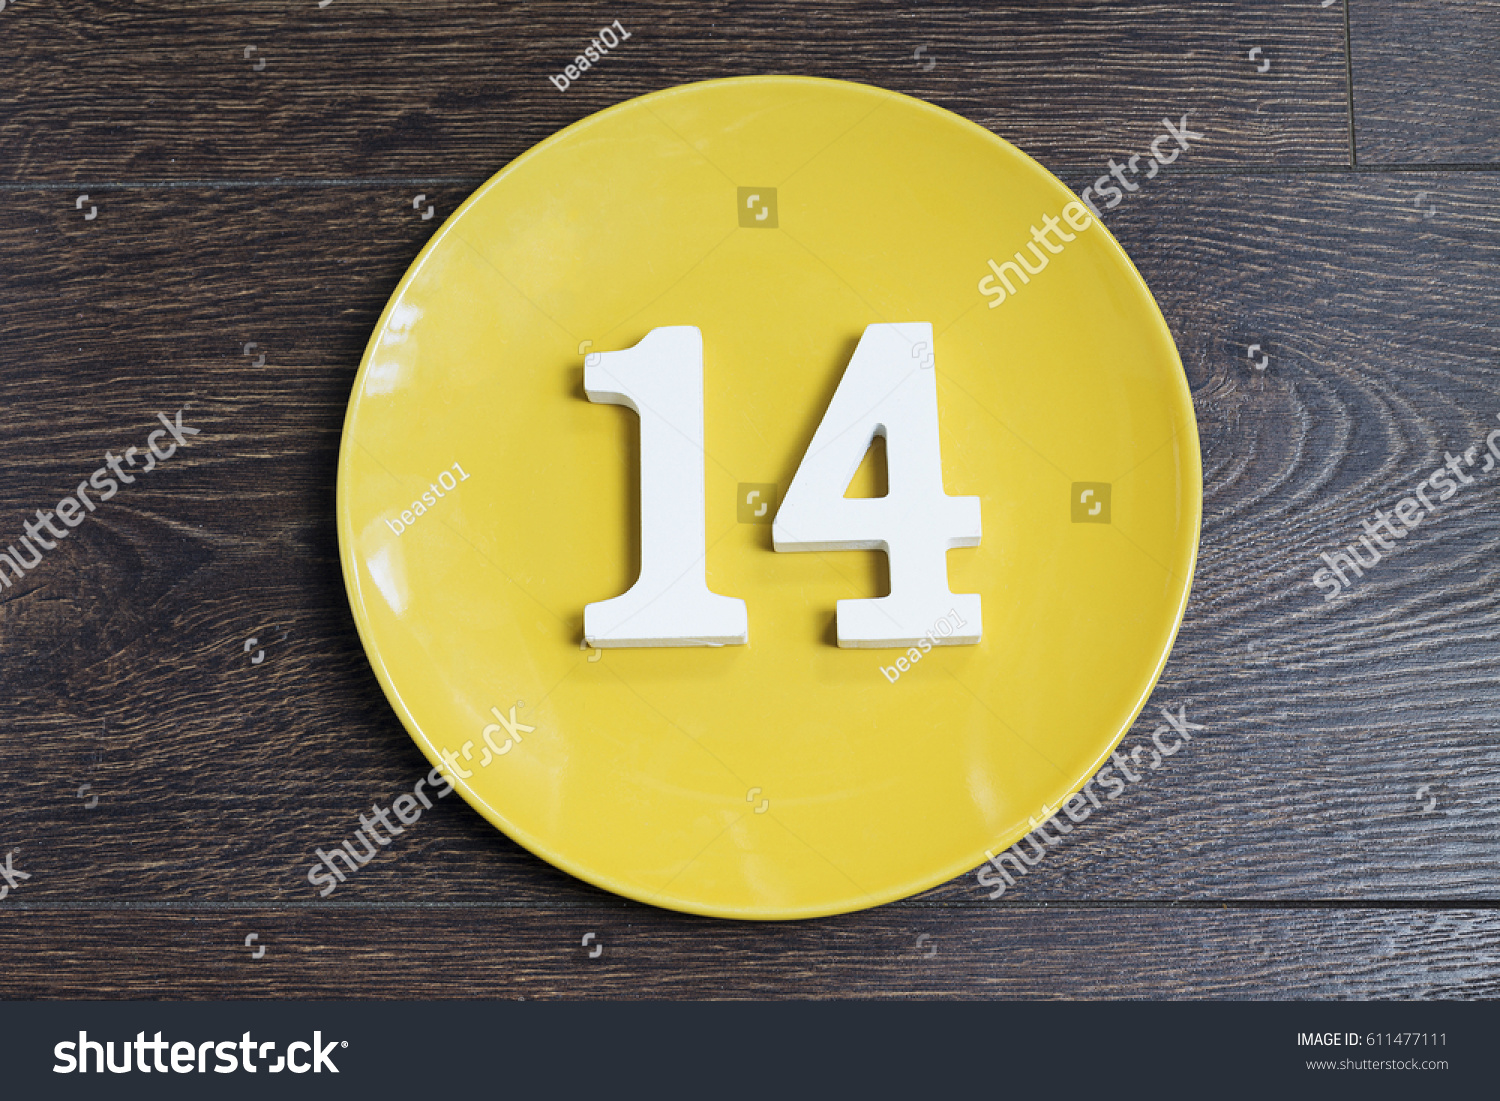 Figure fourteen on the yellow plate and brown background. #611477111